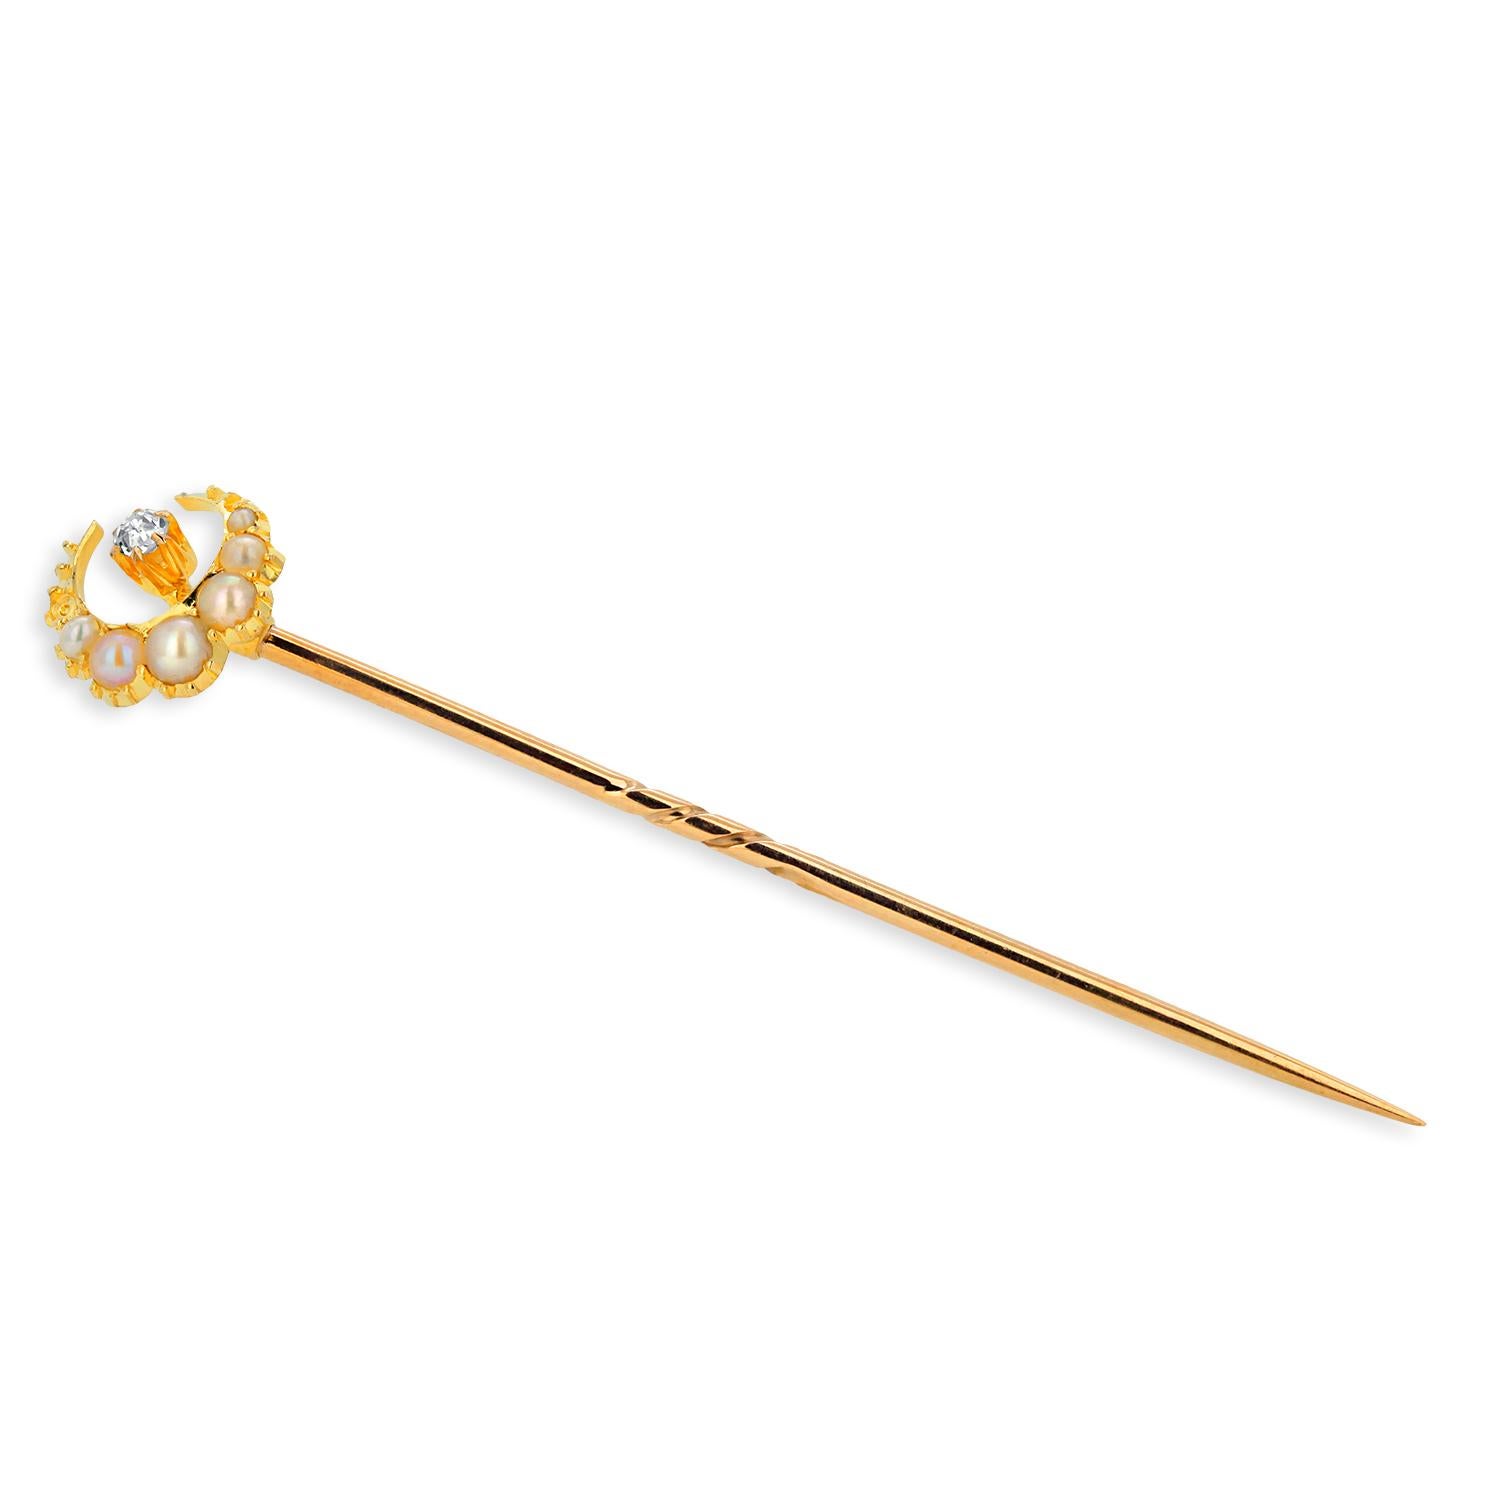 Vintage 18 karats yellow gold stick pin or brooches 
Pin is designed as a crescent moon with seed pearls, old-cut diamond
Stamped 18CT
Measuring in length 59mm, 0.40 inch
In excellent condition 
An antique gold crescent moon pin with old cut